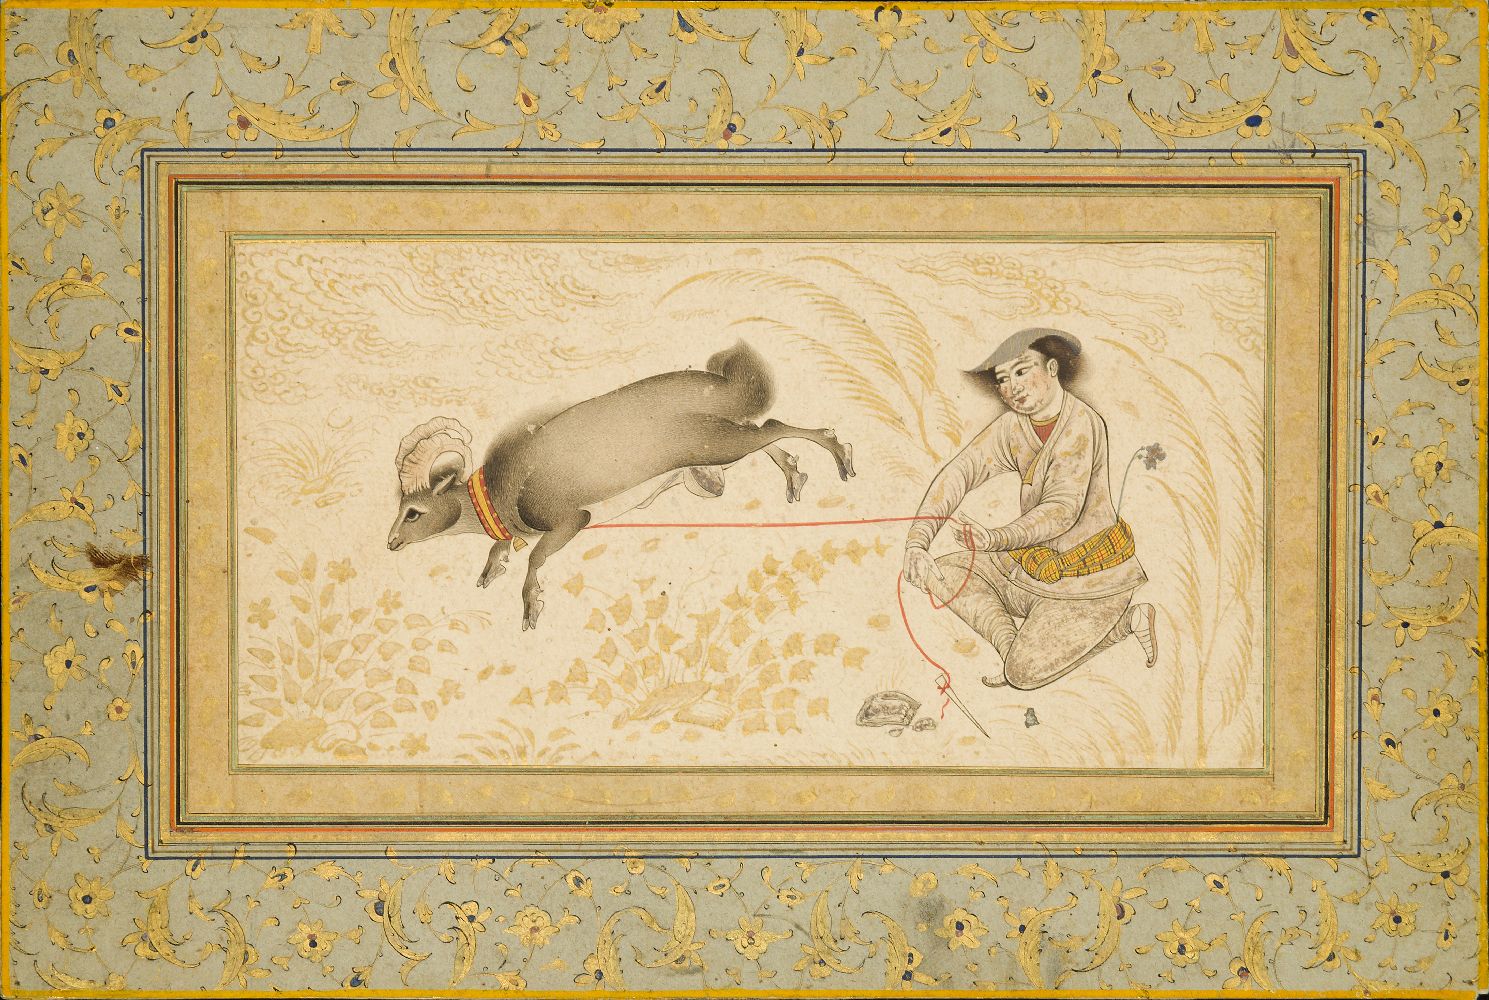 A shepherd and his ram, Qajar Iran, 19th century in the Safavid style, black ink, opaque pigments